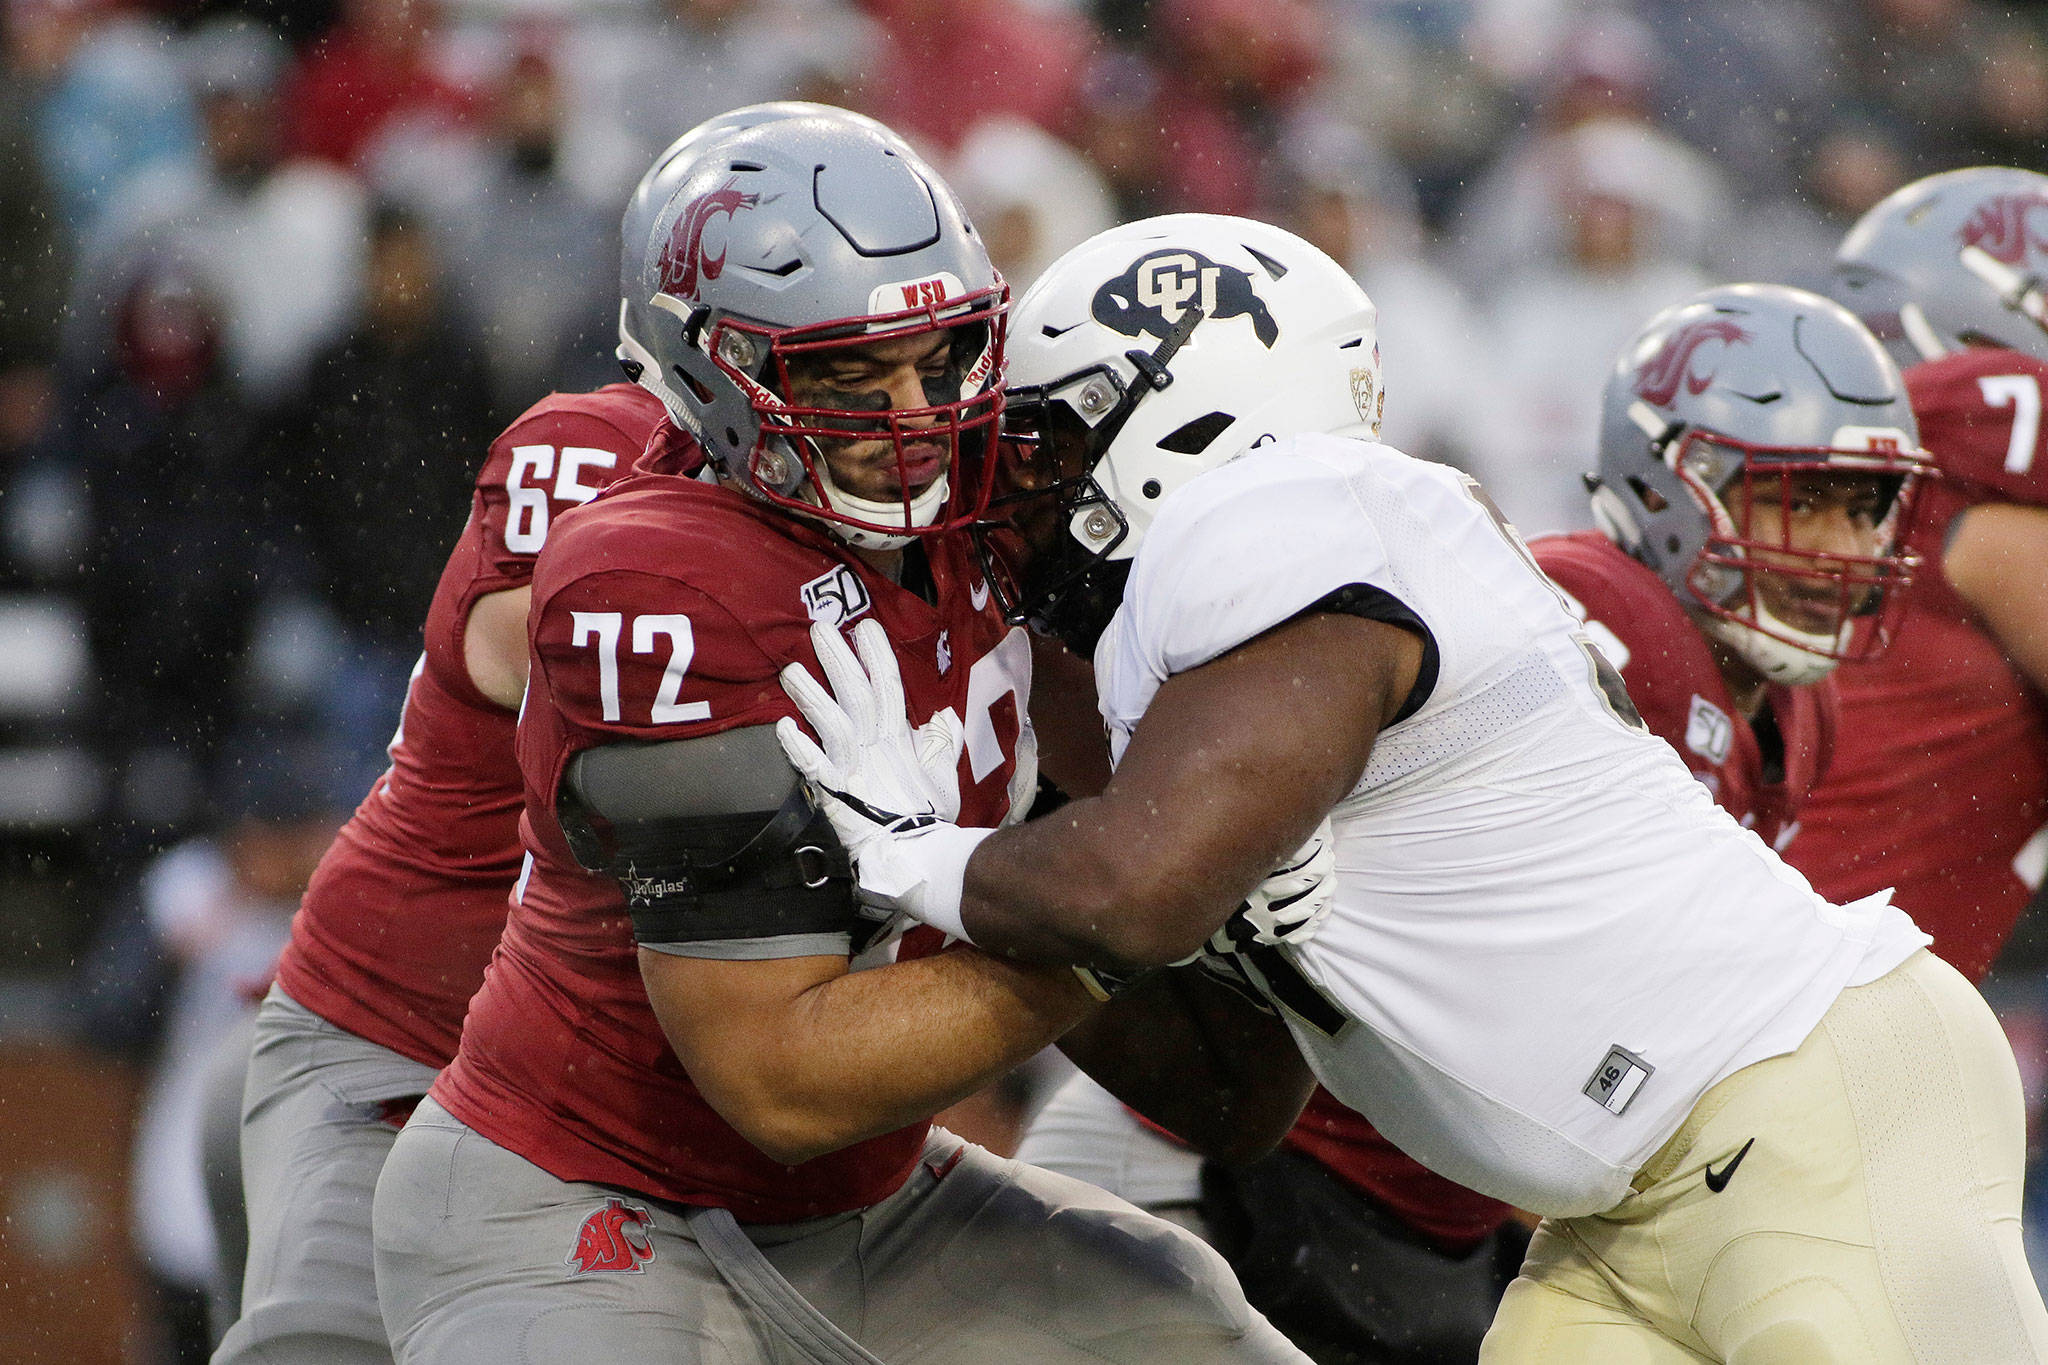 Washington State offensive lineman Abraham Lucas (left), an Archbishop Murphy alum, blocks Colorado defensive tackle Na’im Rodman during the first half of a game Oct. 19, 2019, in Pullman. (AP Photo/Young Kwak)